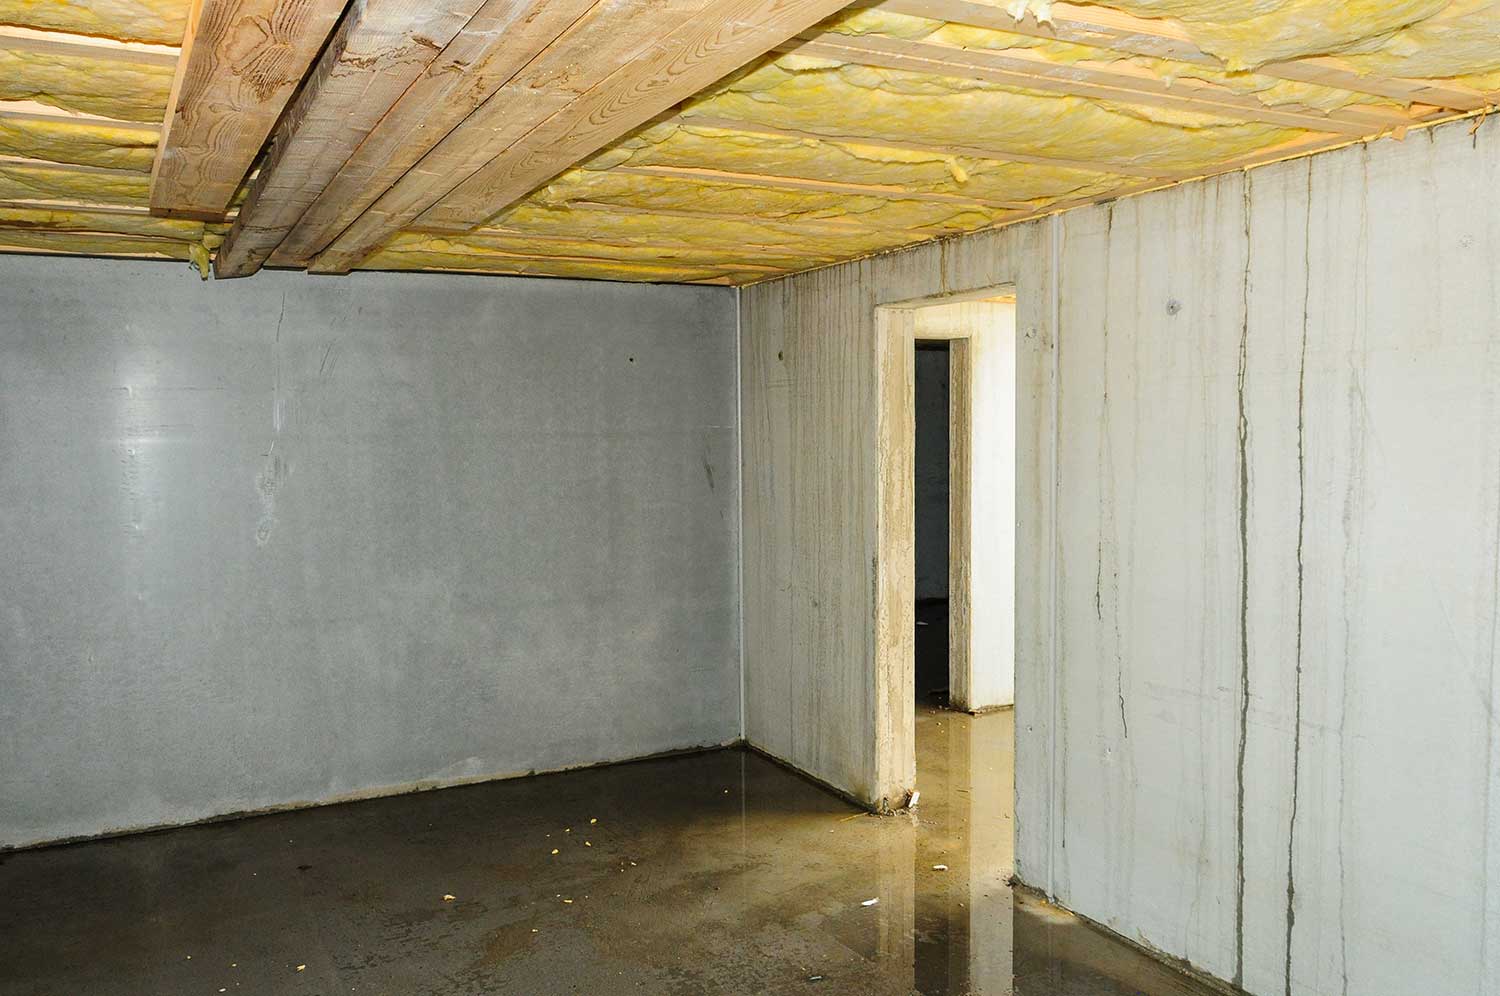 Wet faulty builded cellar